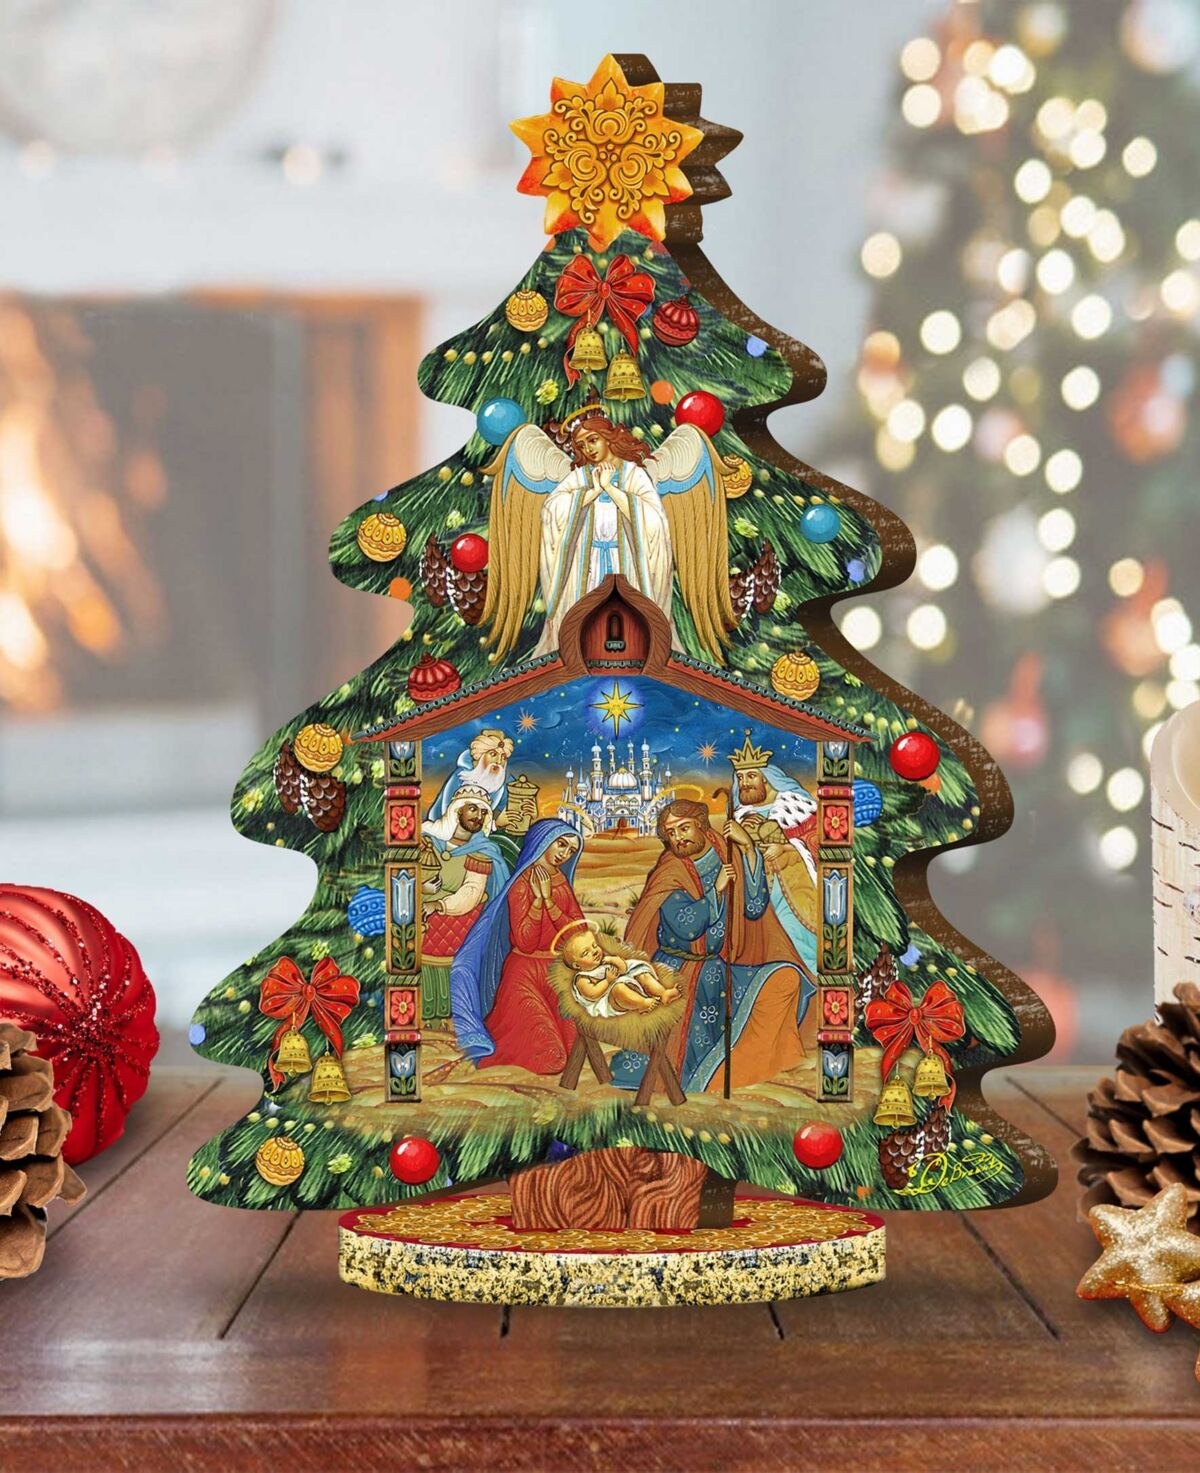 Designocracy Story of Nativity Holiday Decorated Tree - Multi Color